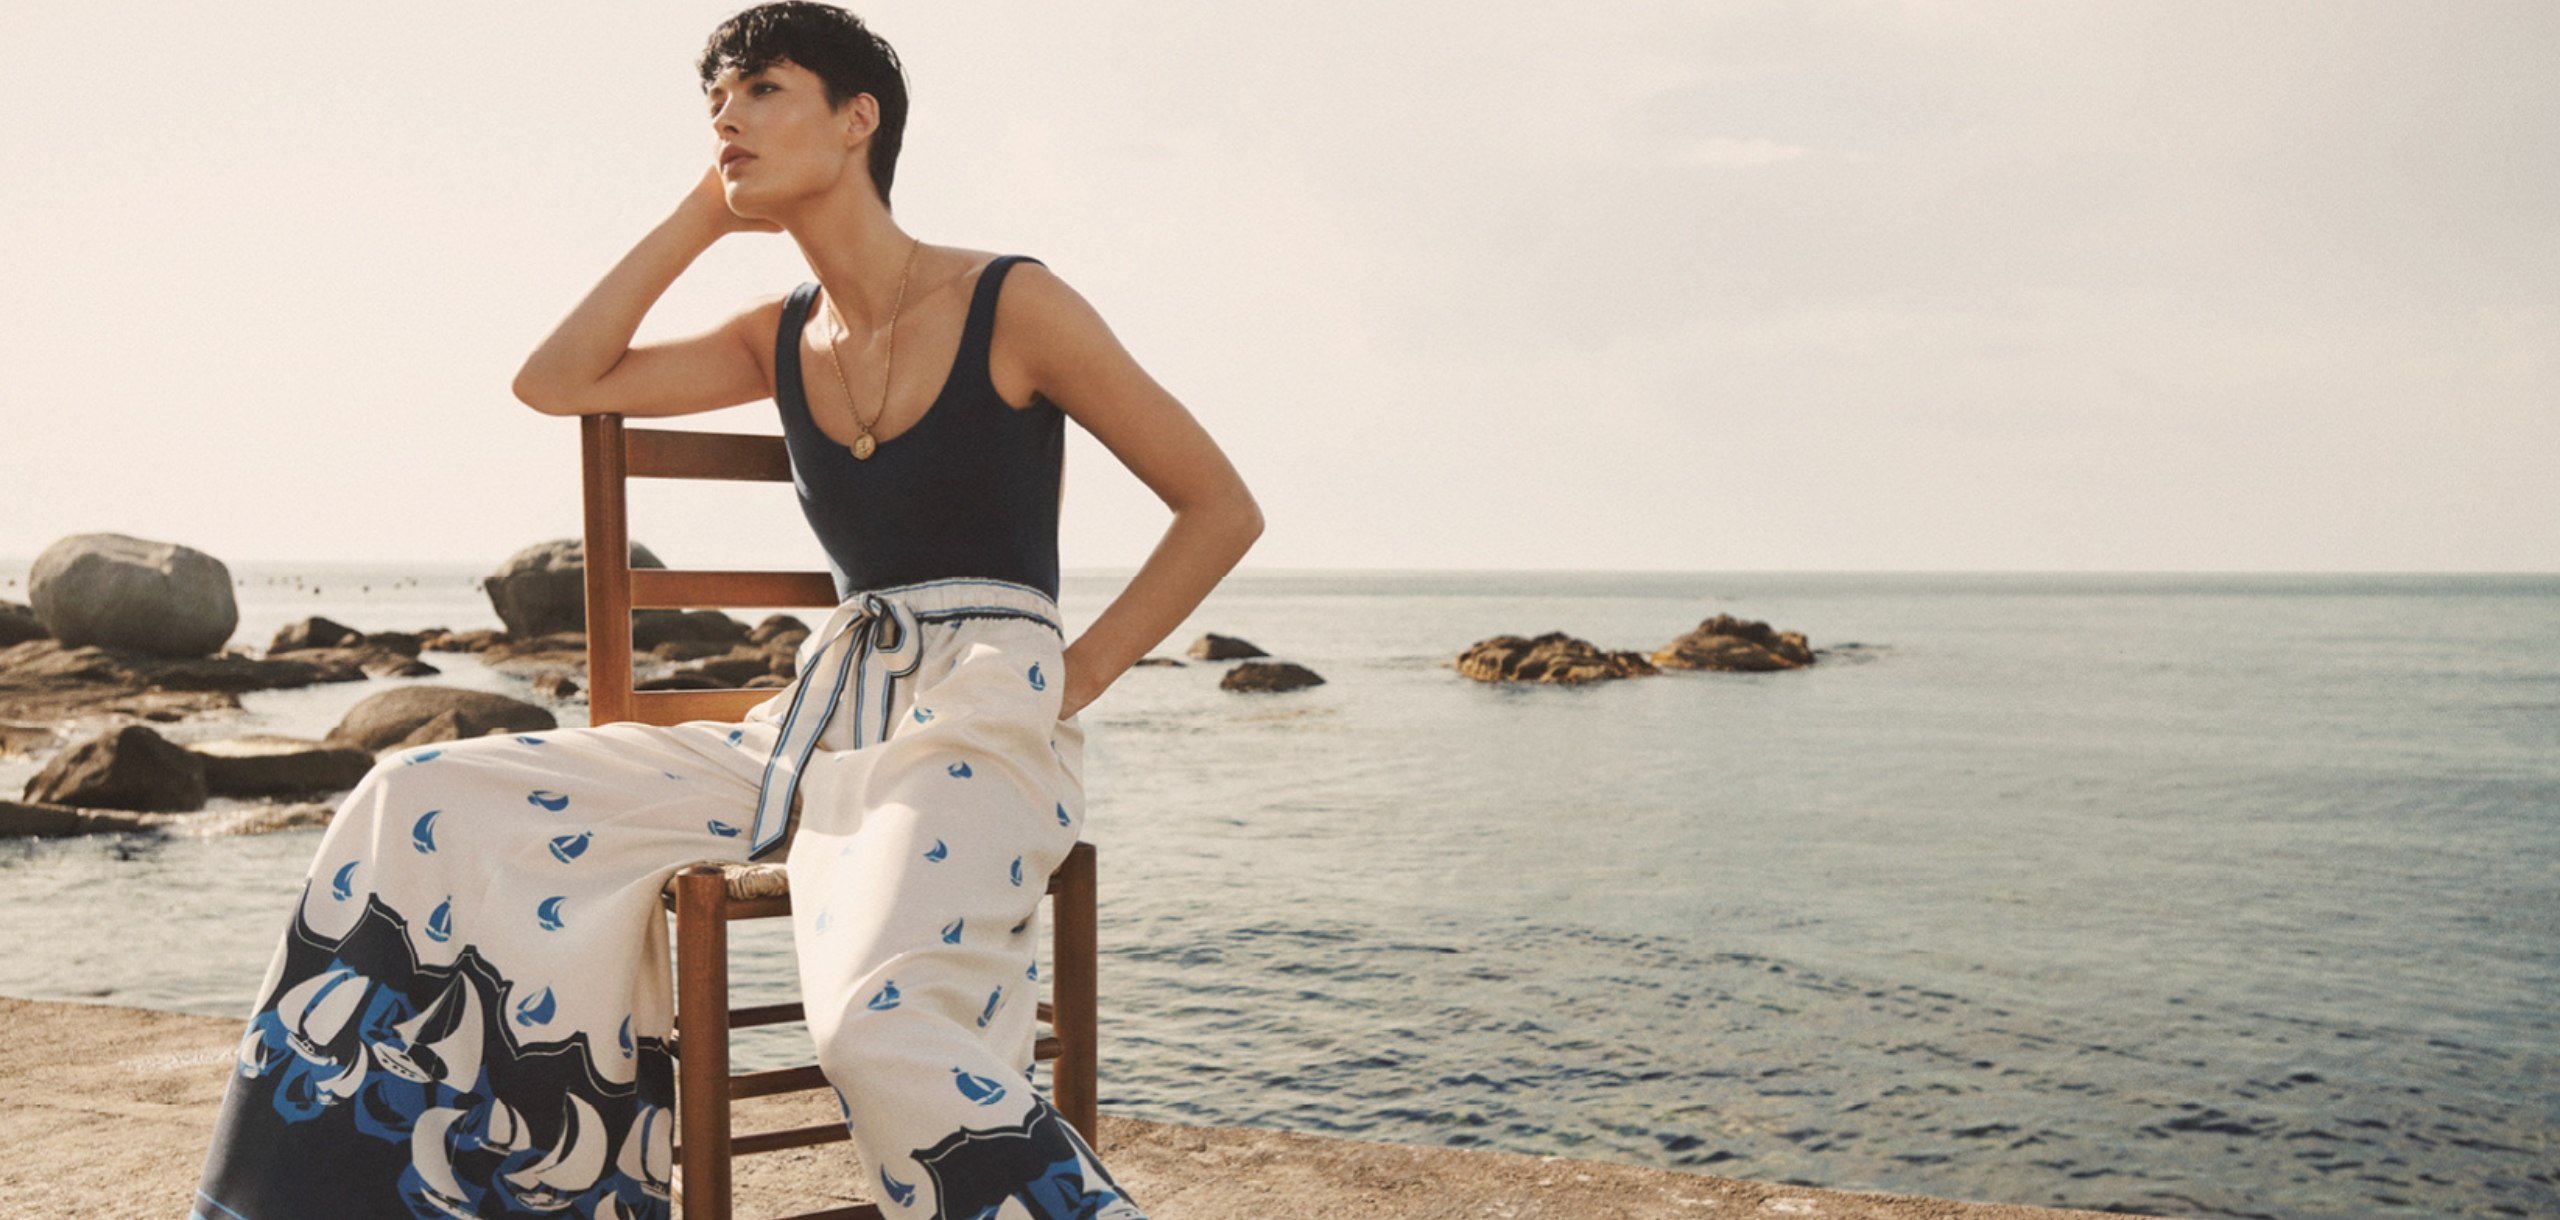 Model sitting on a wood chair at the beach dressed in a navy sleeveless top and sailboat print trousers